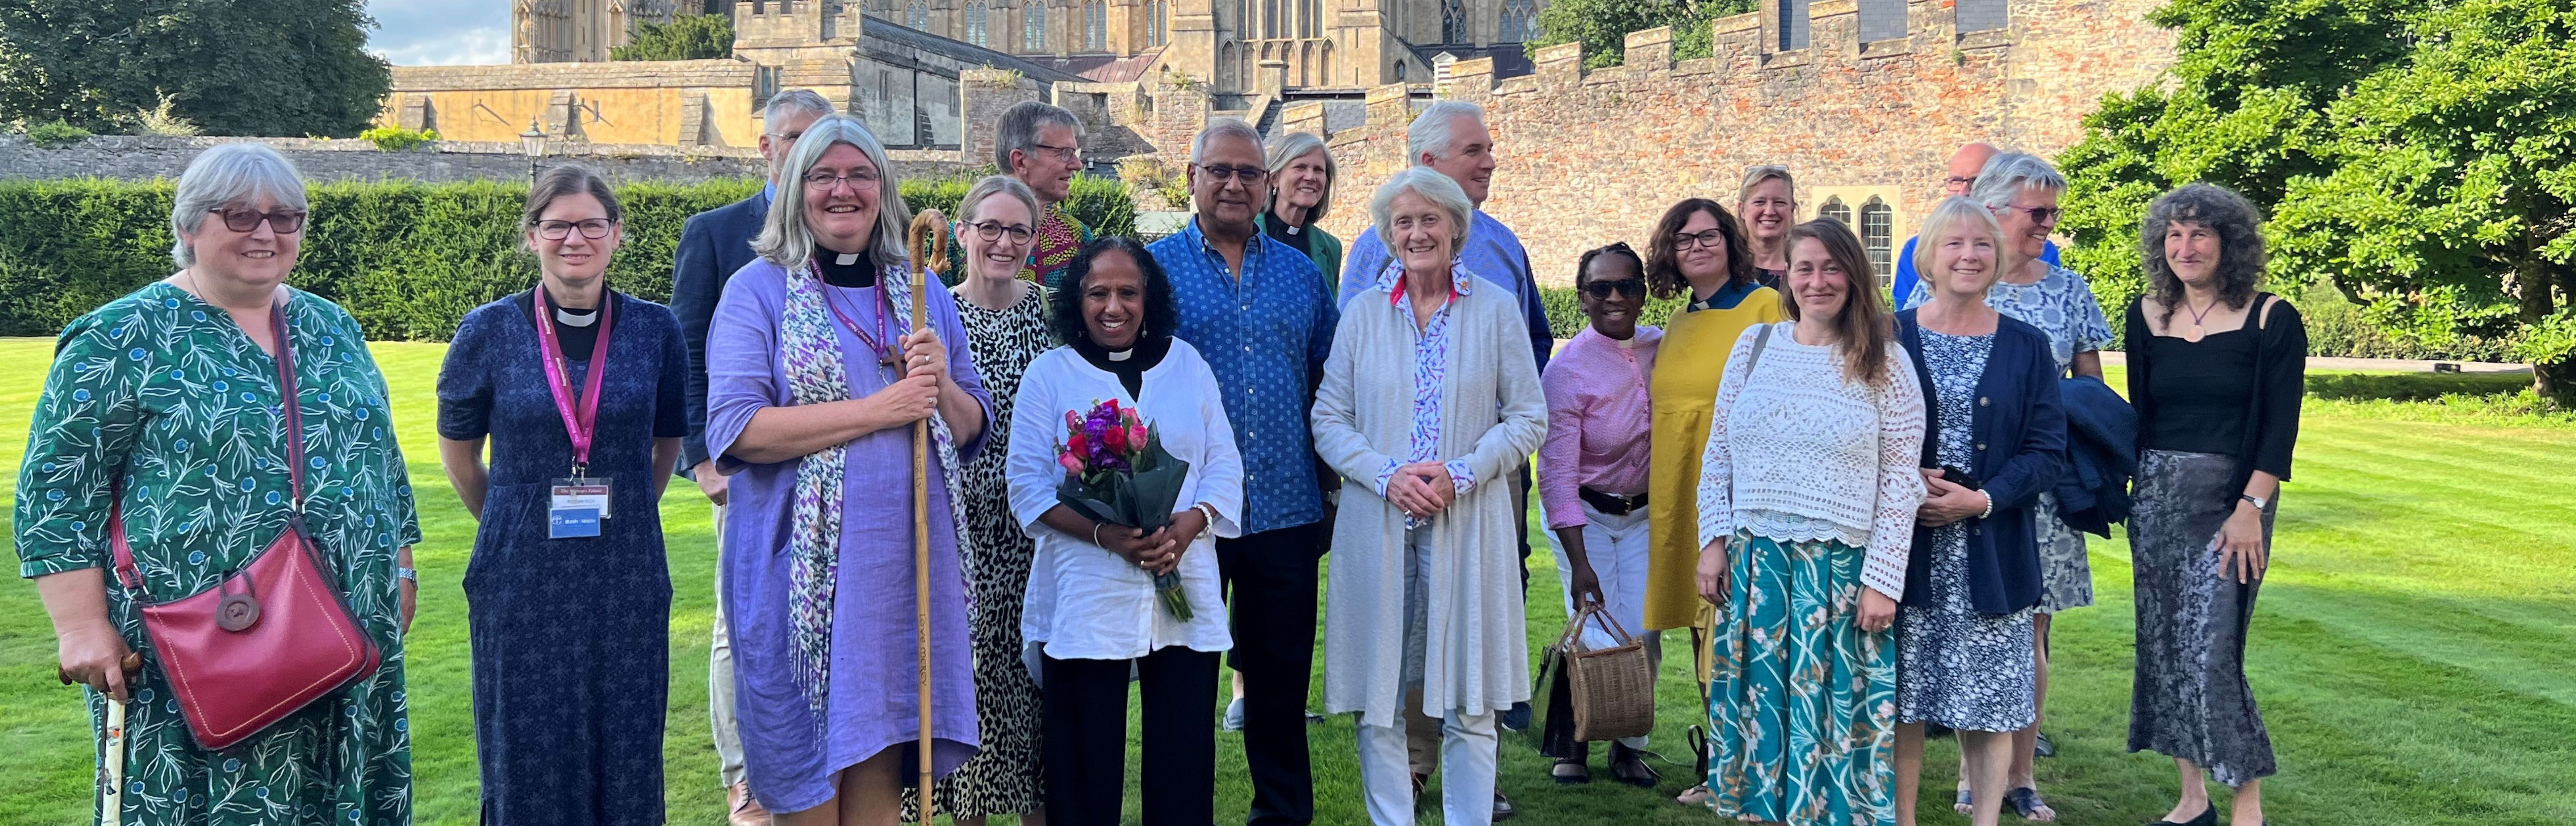 Narinder Tegally and friends at the Bishop's Palace